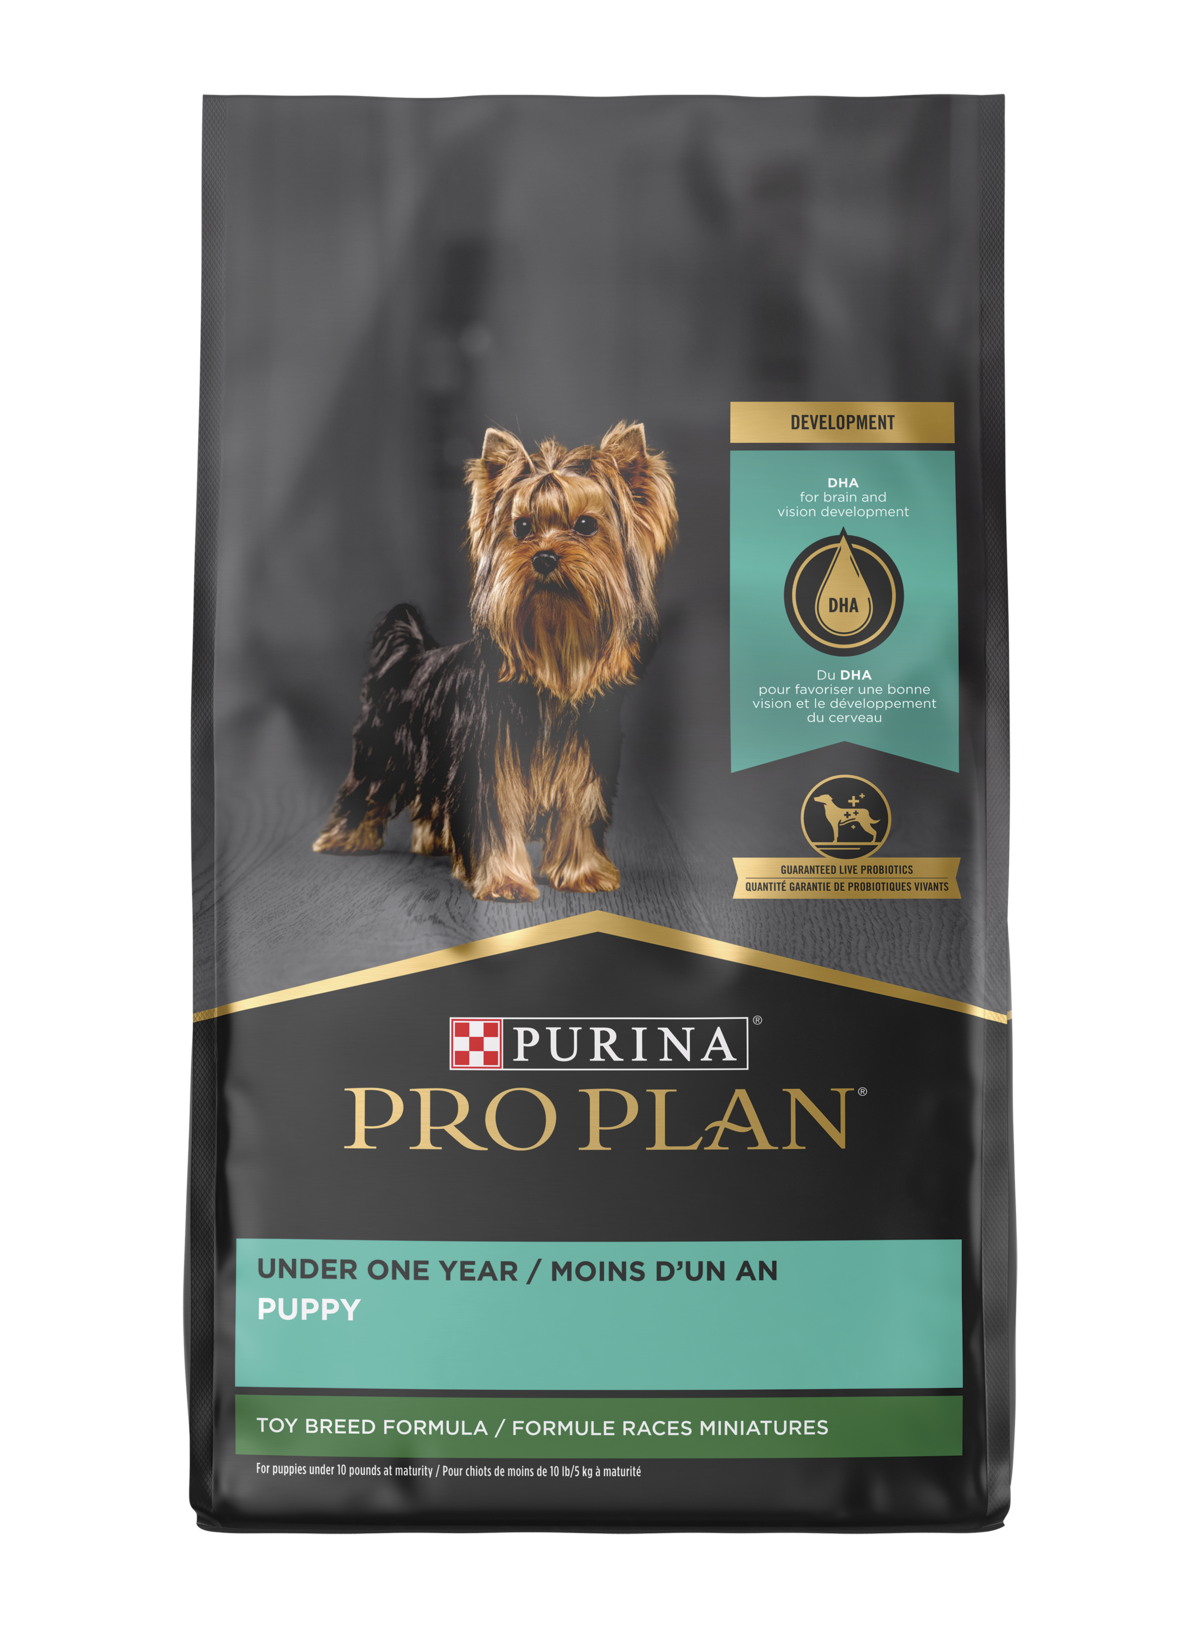 PRO PLAN PUP TOY BREED 5#